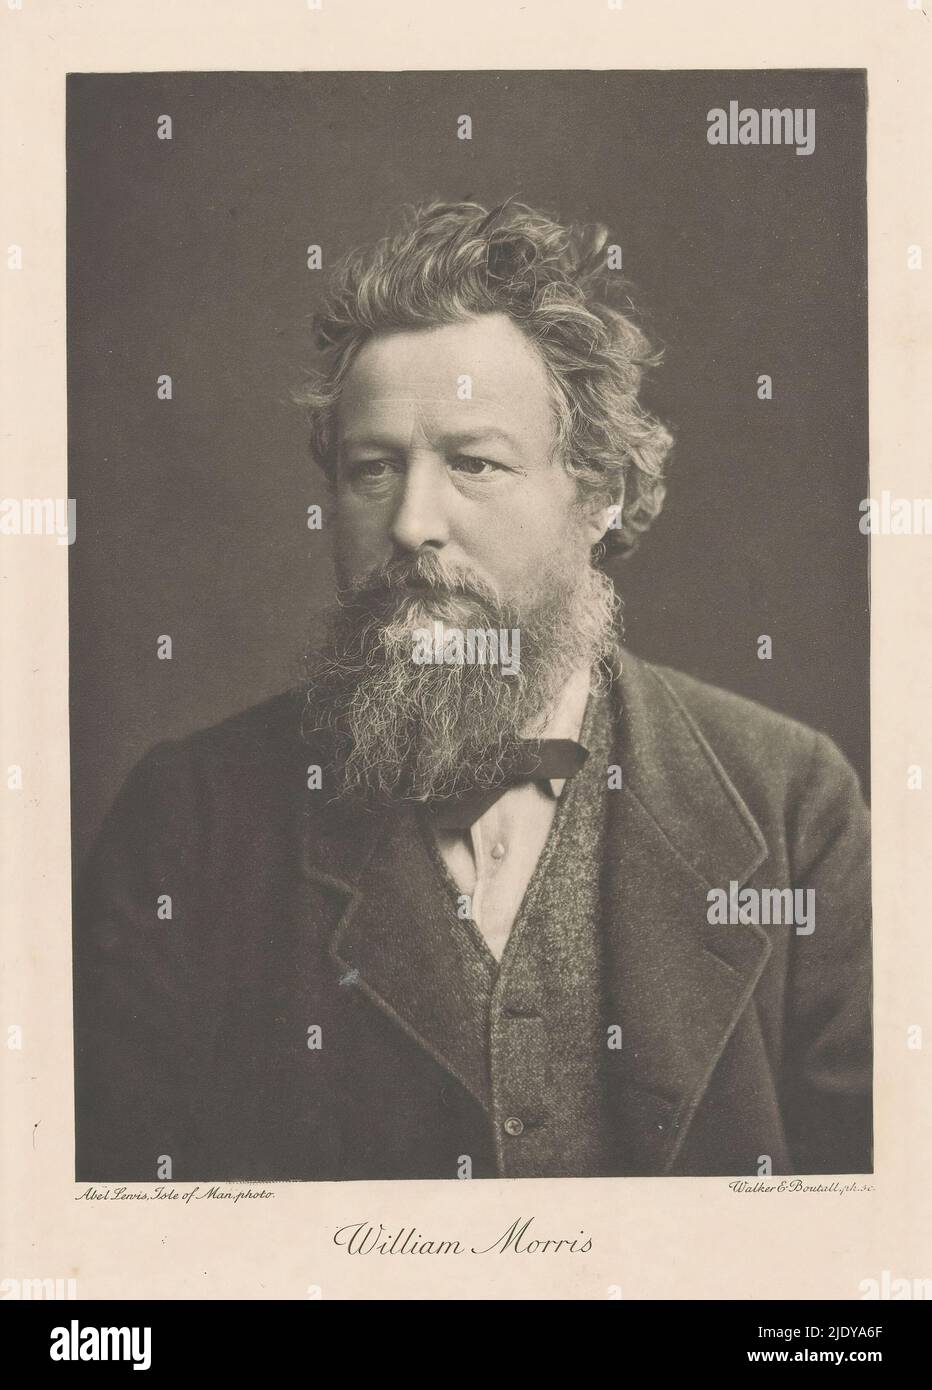 Portrait of William Morris, William Morris (title on object), print maker: Walker & Boutall, (mentioned on object), Abel Lewis, (mentioned on object), print maker: London, Isle of Man, 1887 - 1900, paper, height 181 mm × width 121 mm Stock Photo